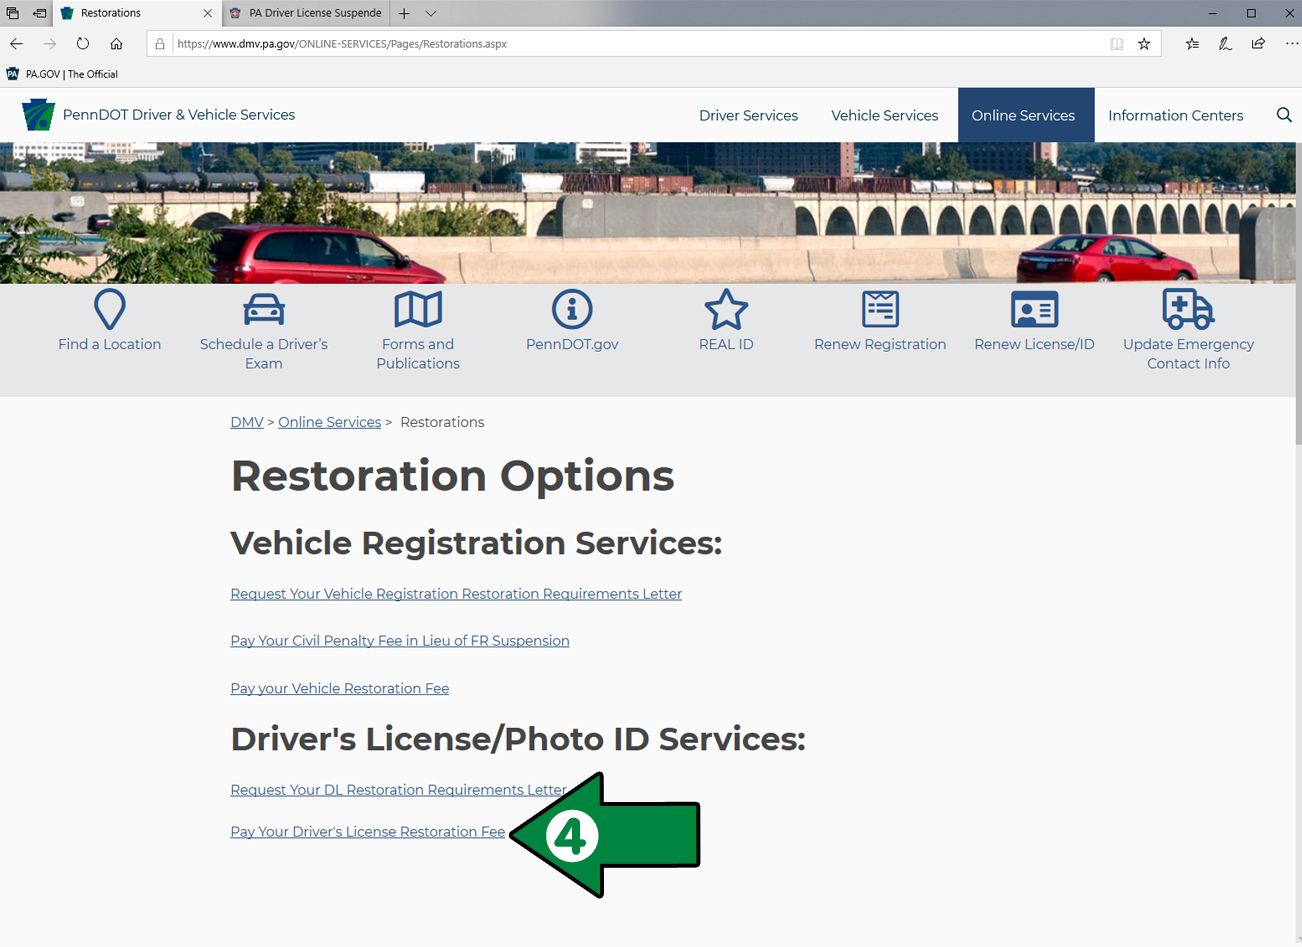 No more DMV! Pa. driver's license renewals to be done online - WHYY